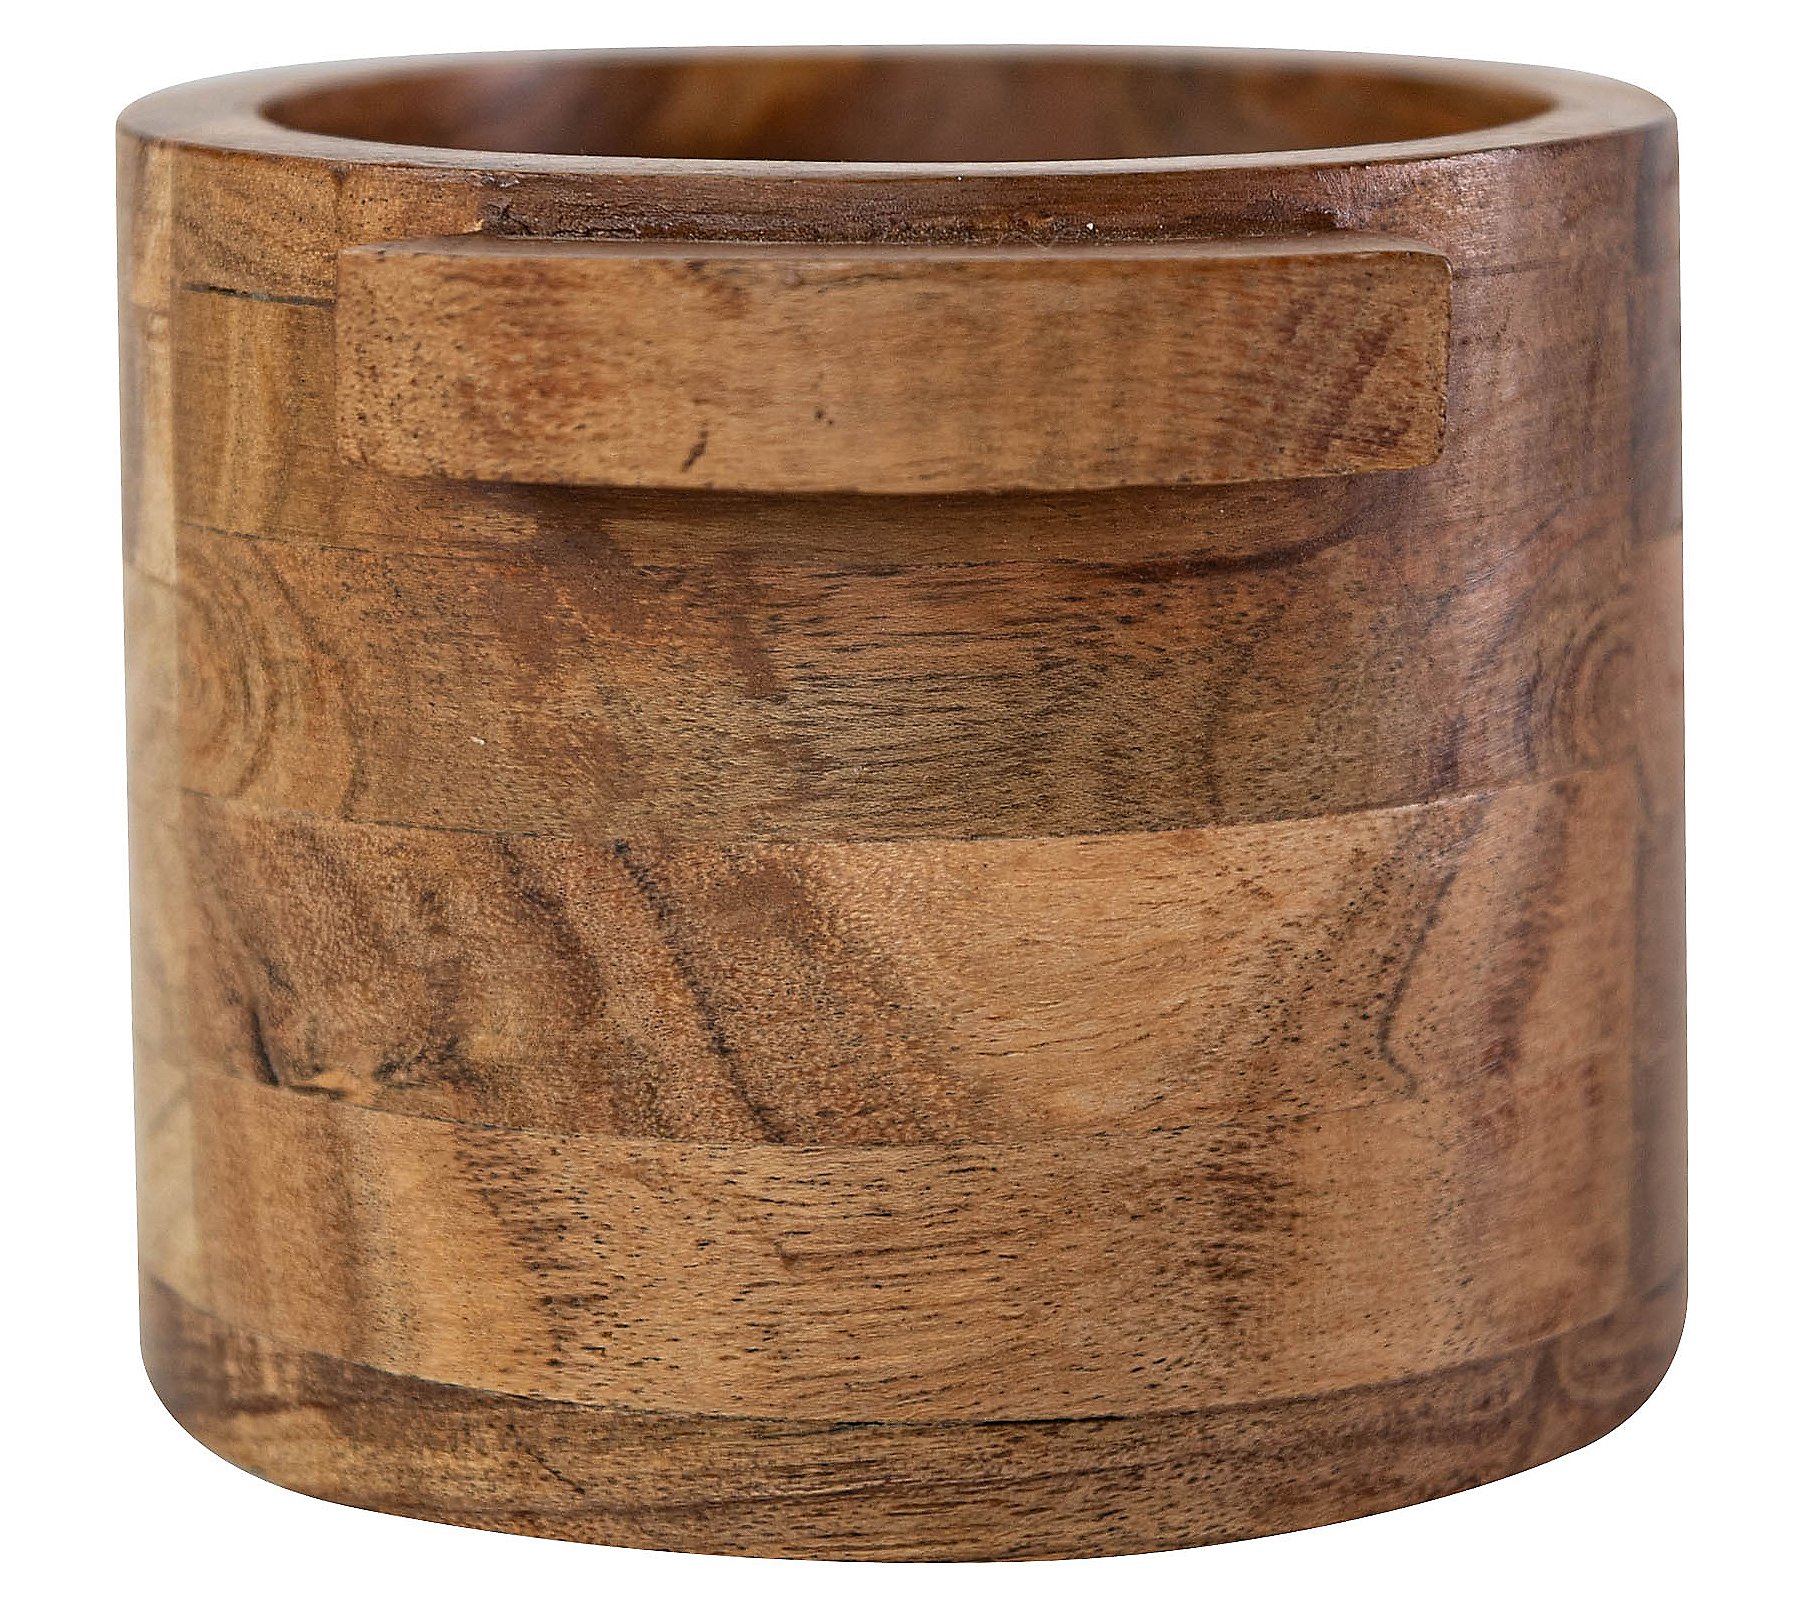 Foreside Home and Garden Handled Acacia Wood Pinc h Bowl